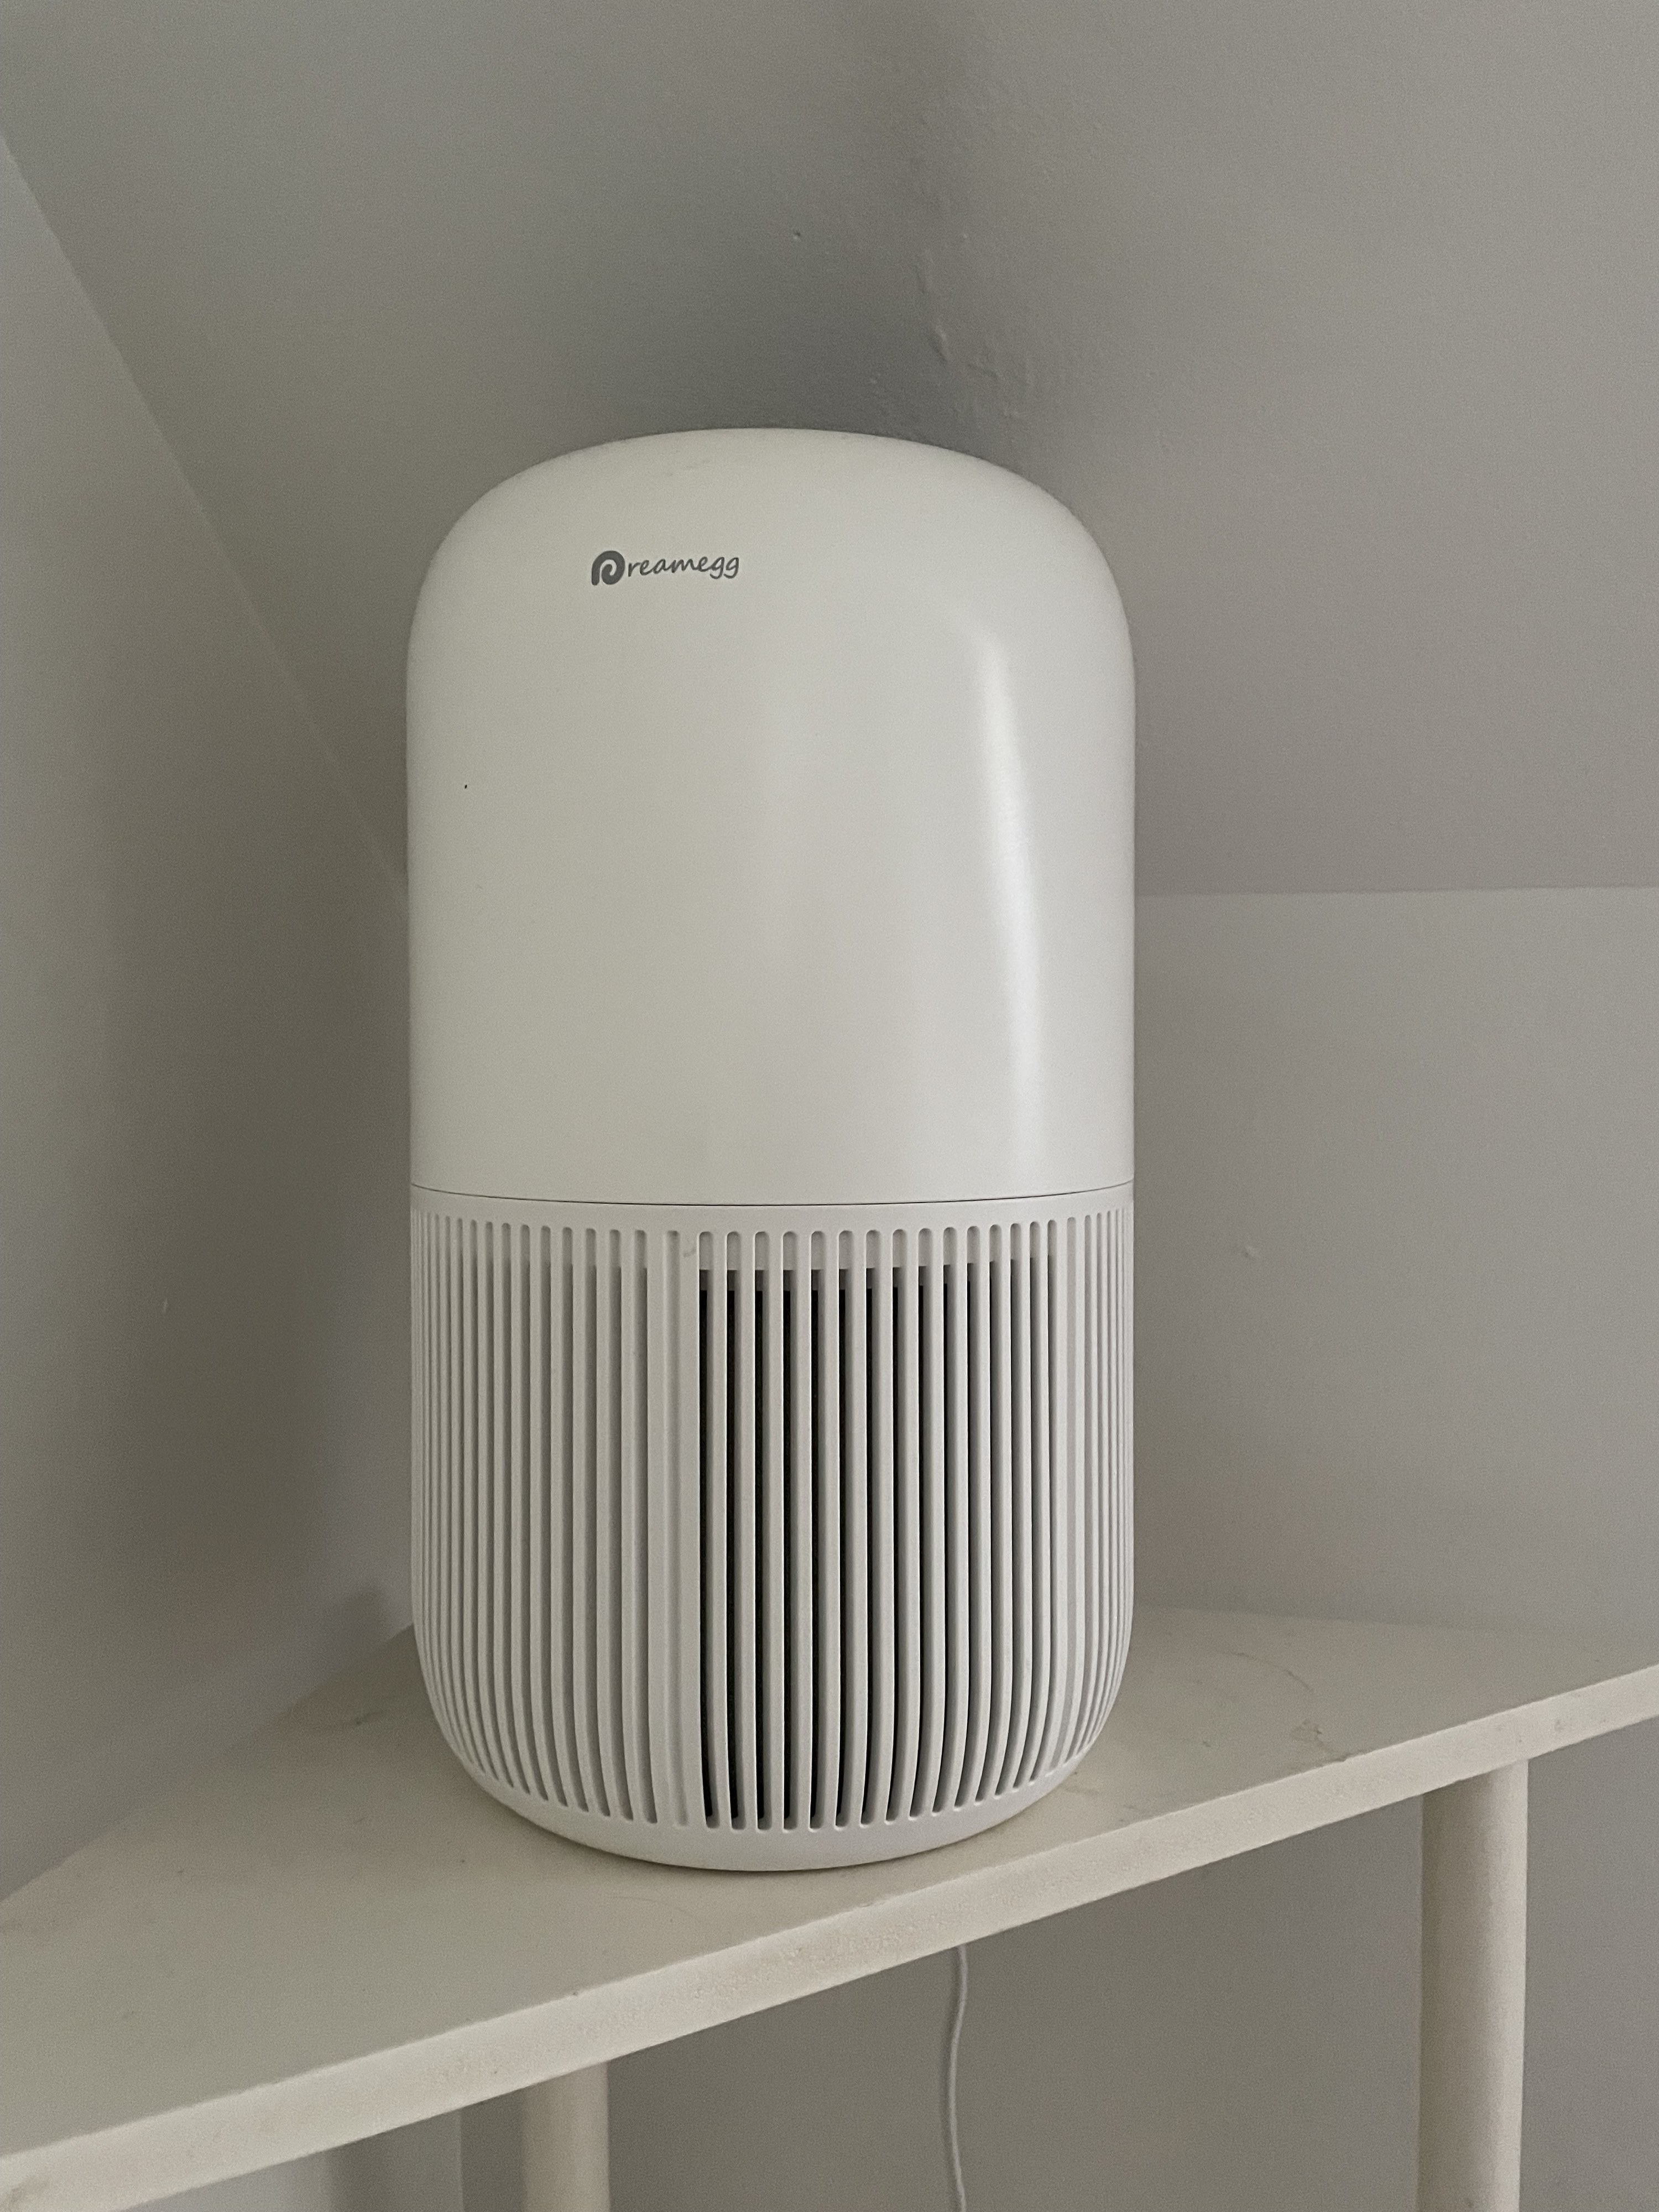 the air purifier on a bedside table